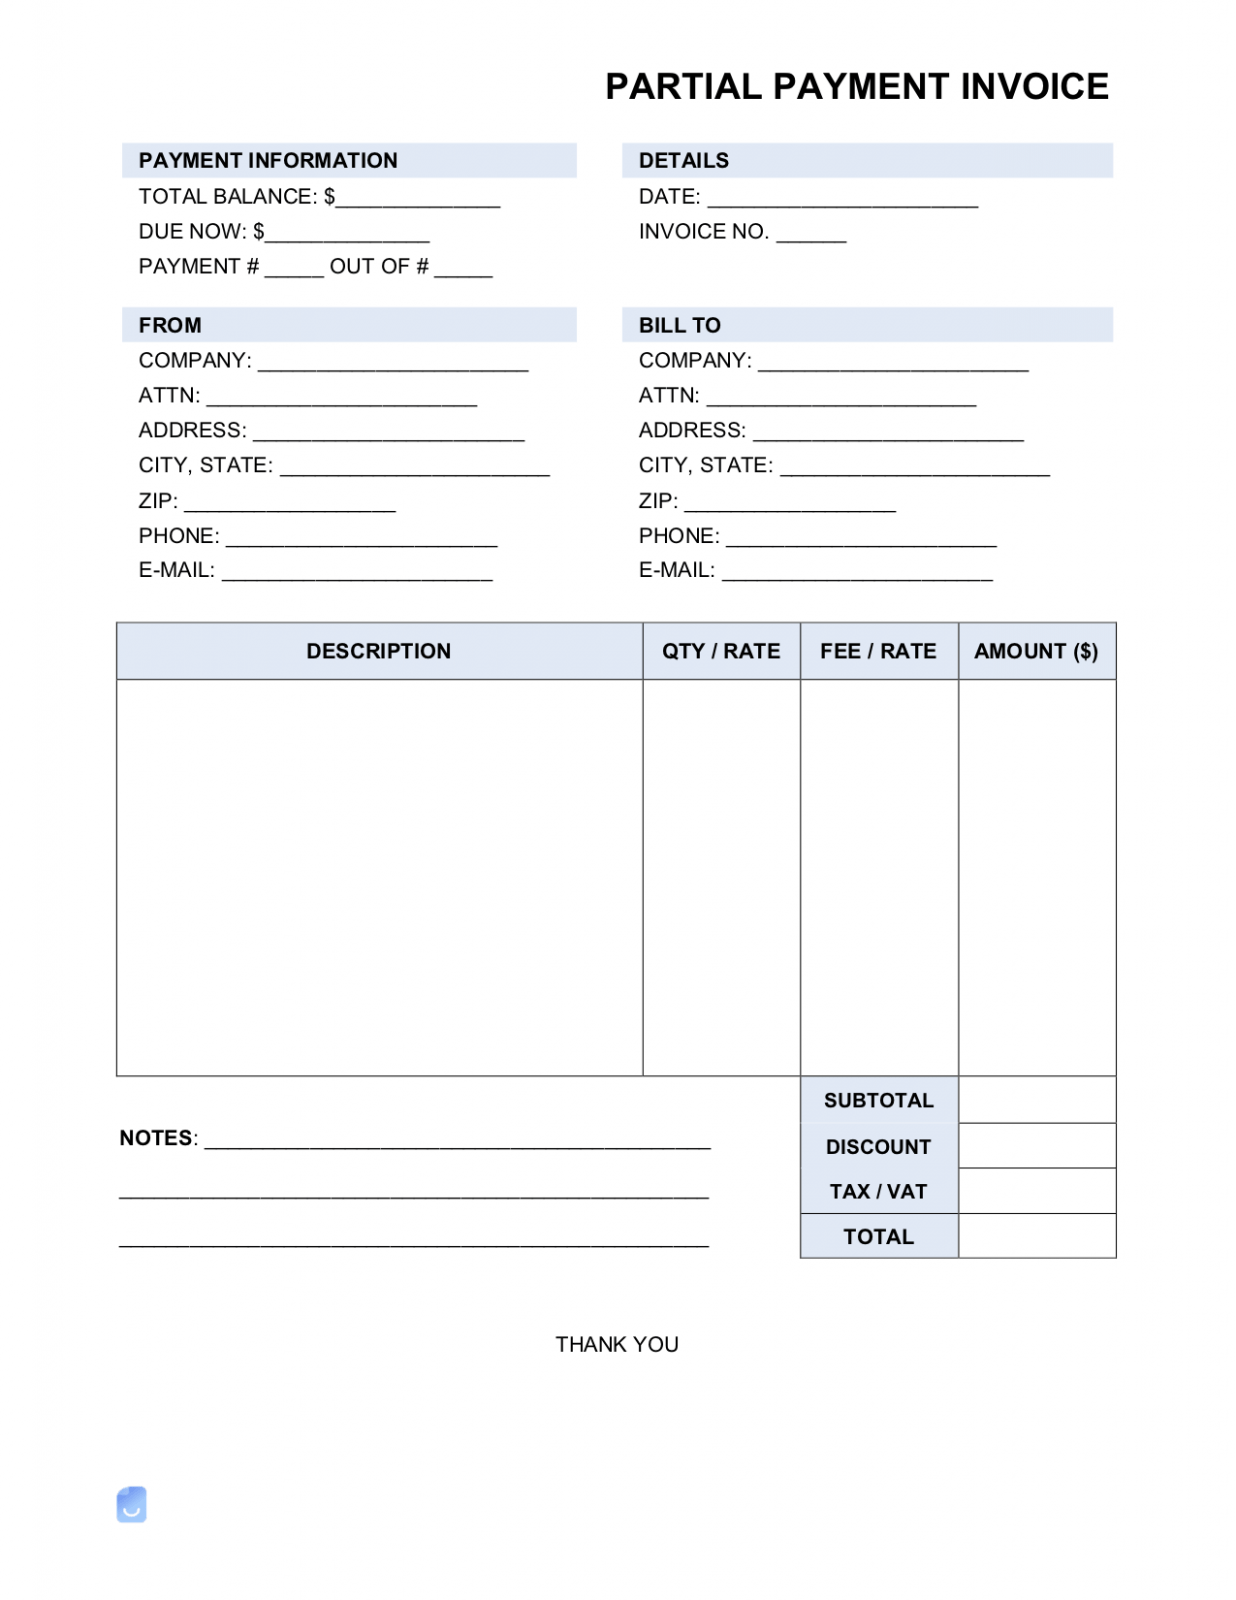 Printable Partial Payment Invoice Template Sample